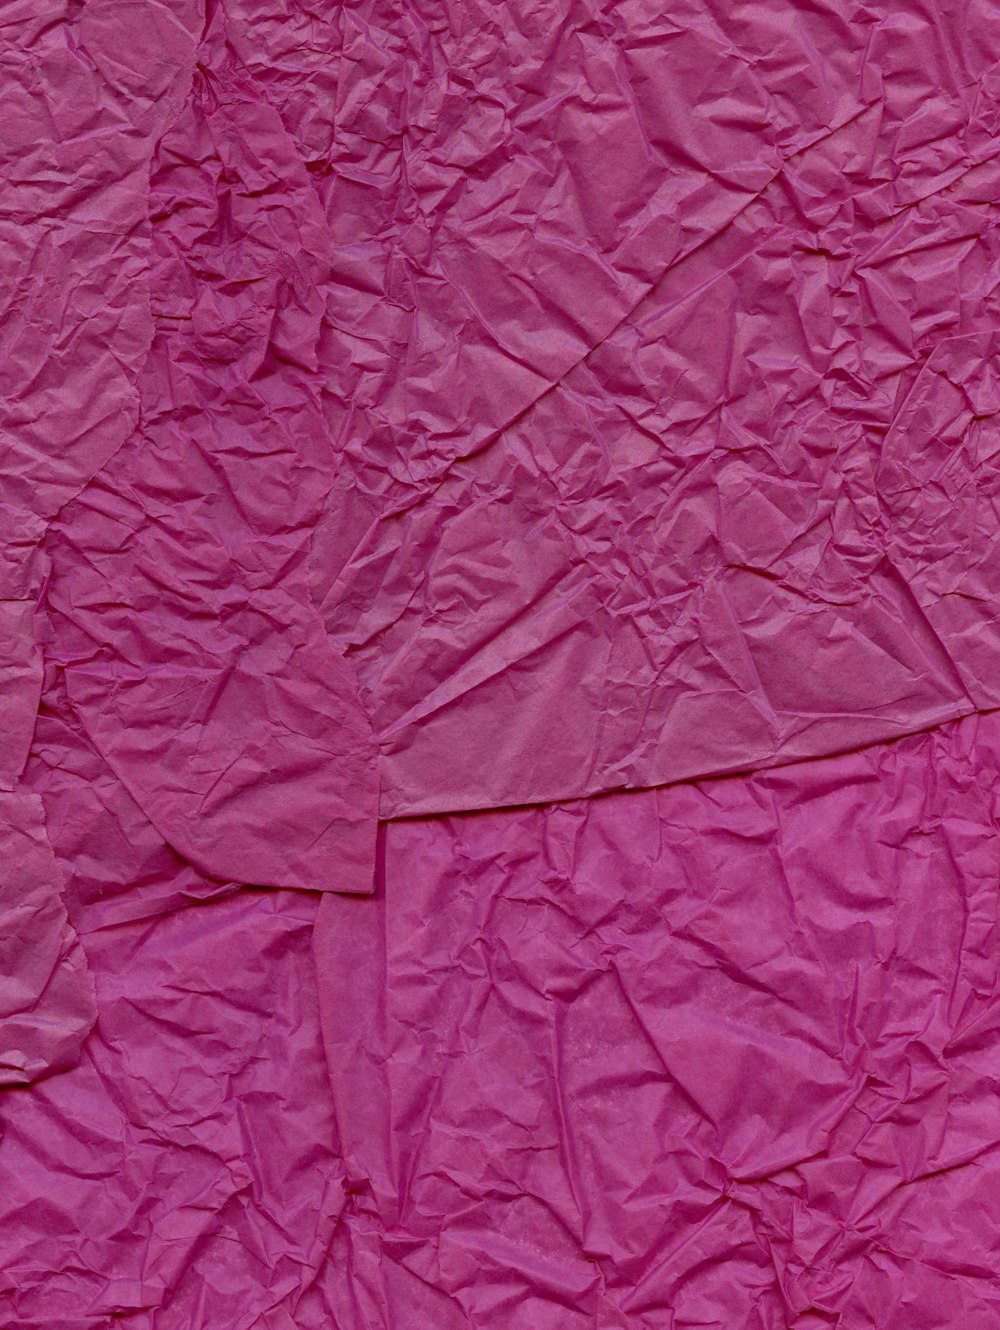 a piece of pink paper that has been folded